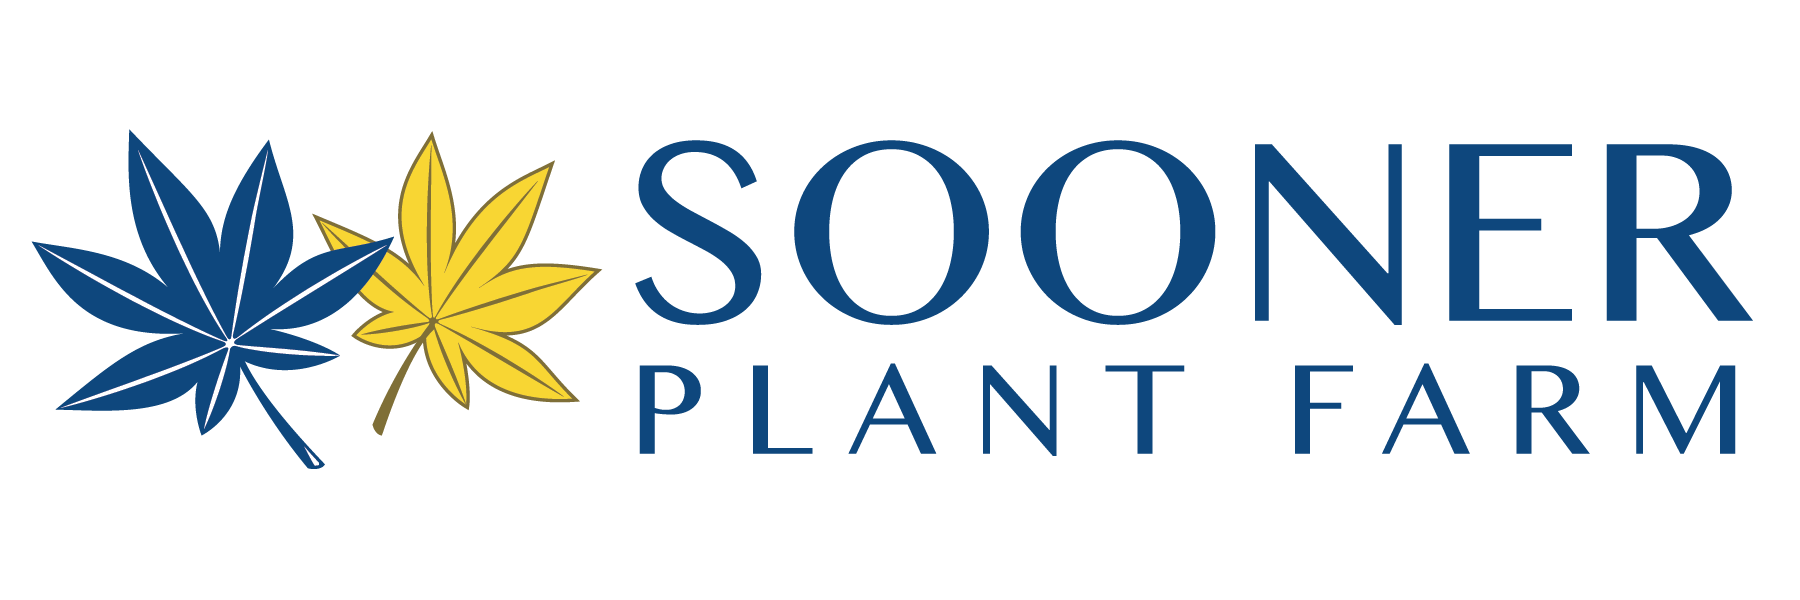 Sooner Plant Farm logo in yellow and blue with leaves.